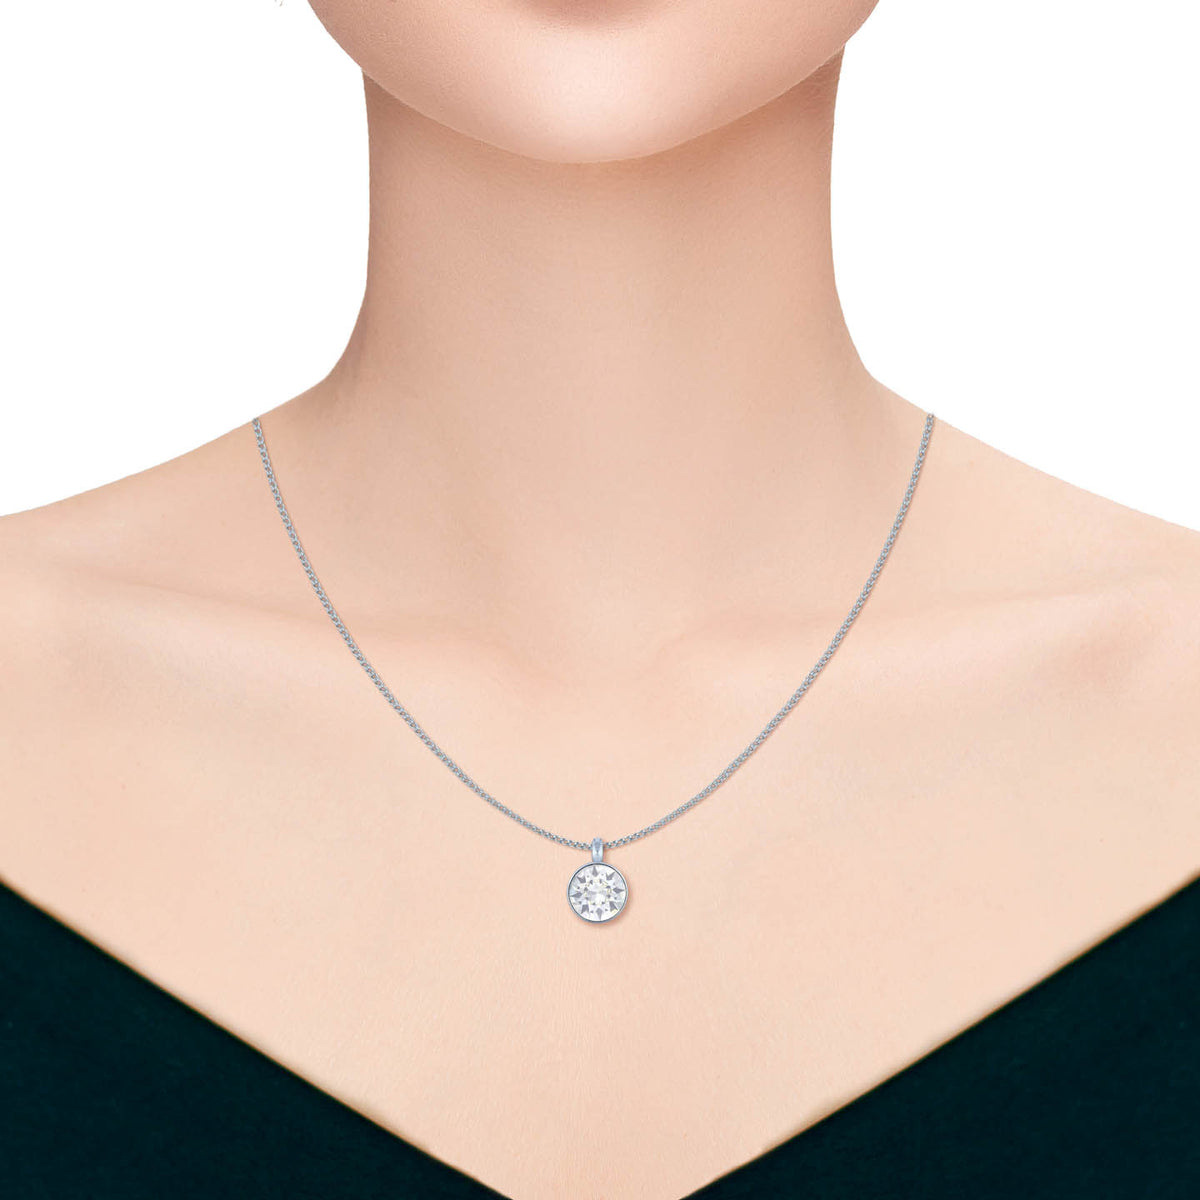 Bella Pendant Necklace with White Clear Round Crystals from Swarovski Silver Toned Rhodium Plated - Ed Heart